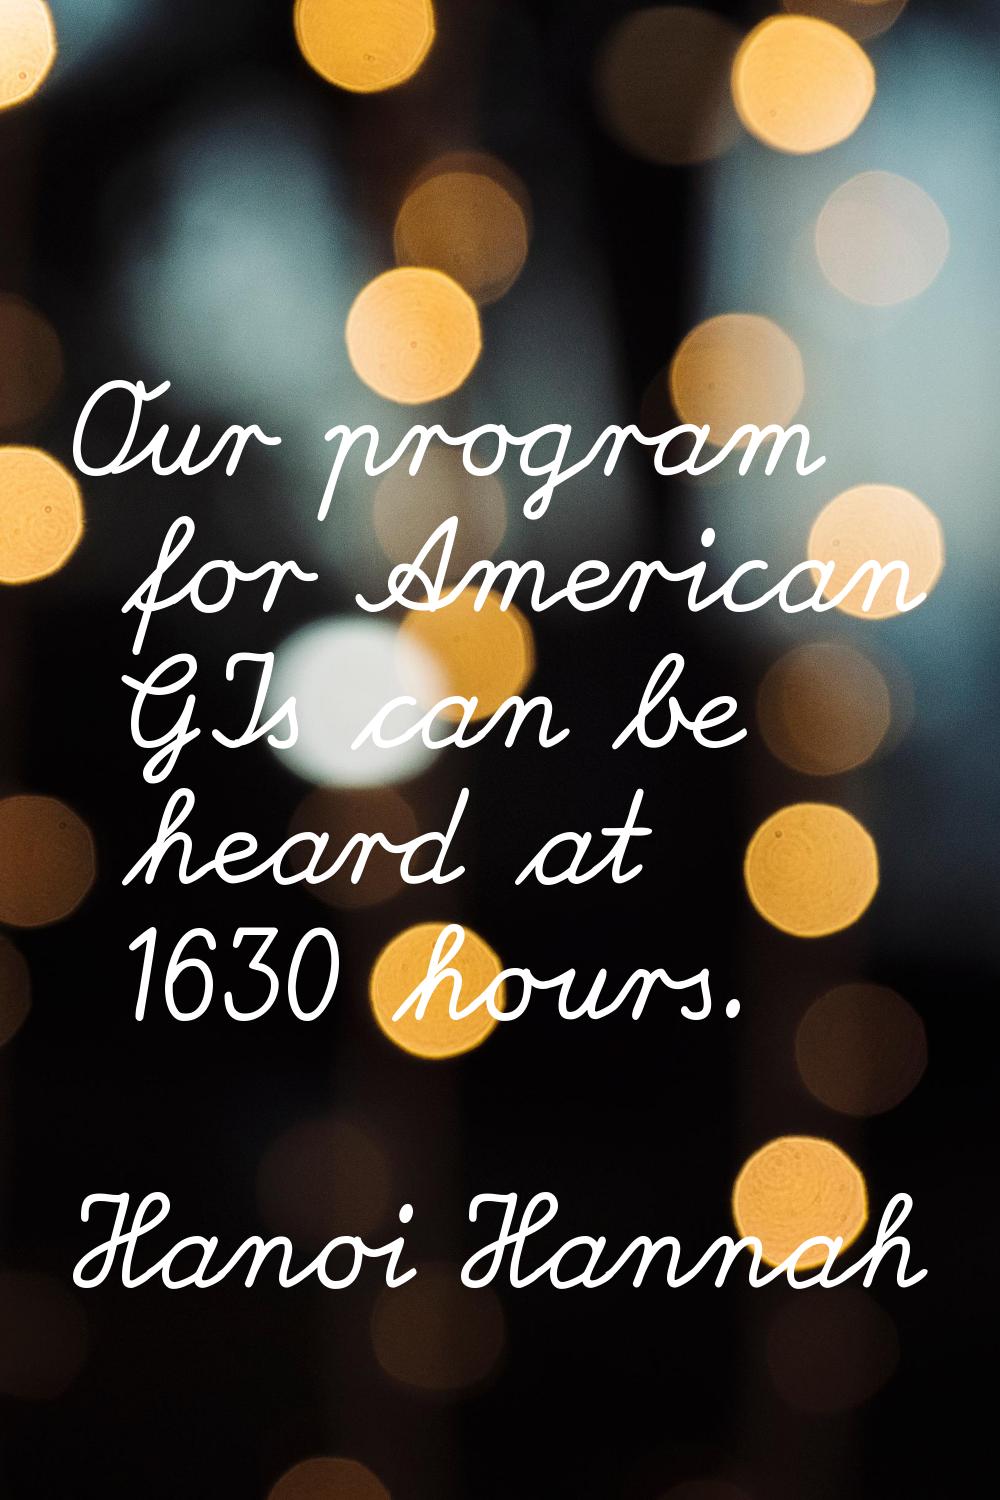 Our program for American GIs can be heard at 1630 hours.